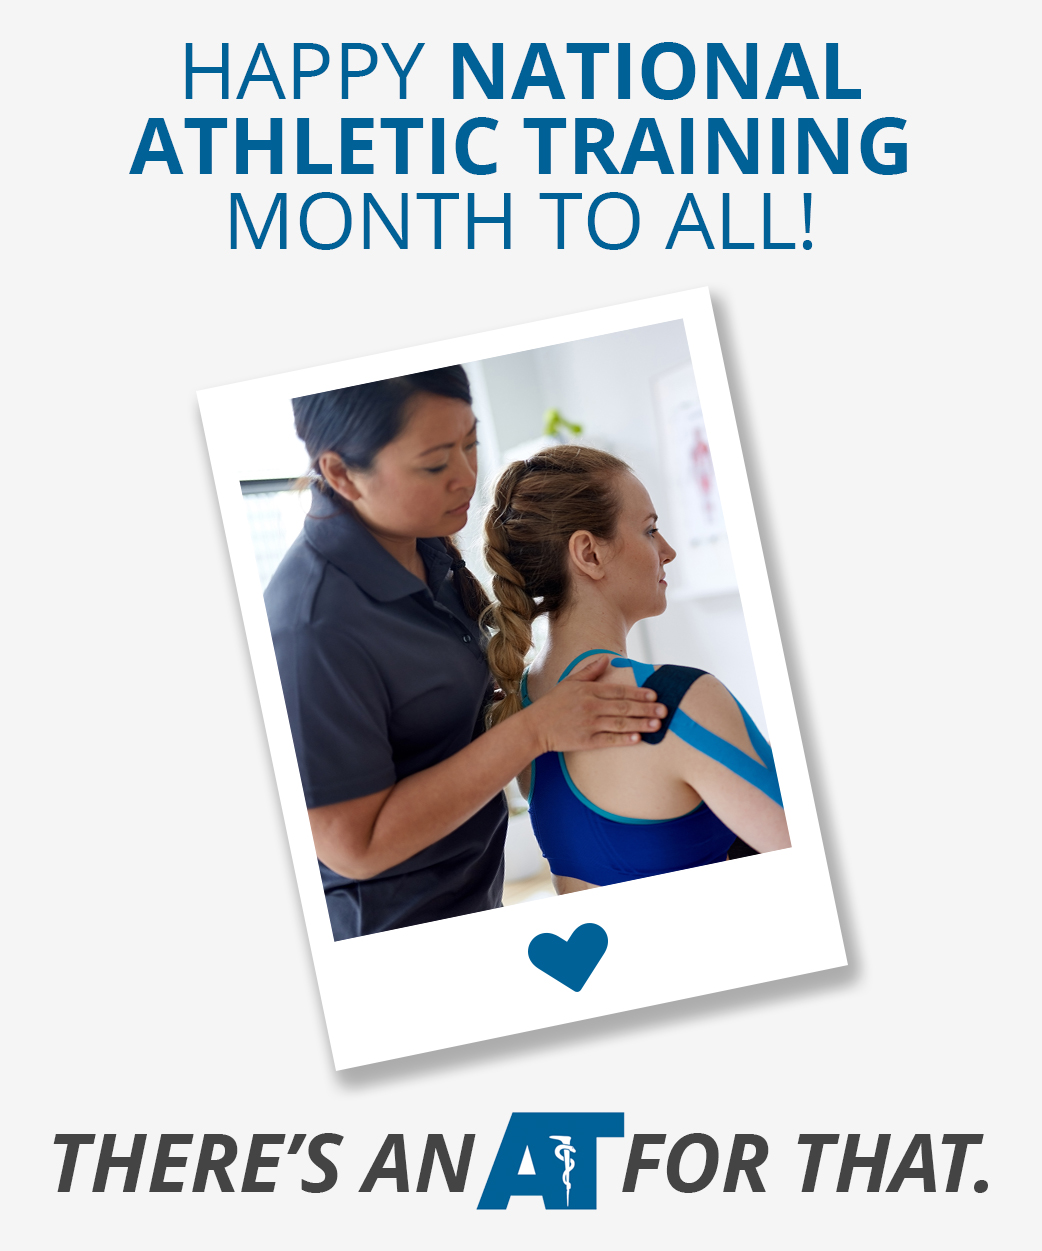 Happy National Athletic Training Month!